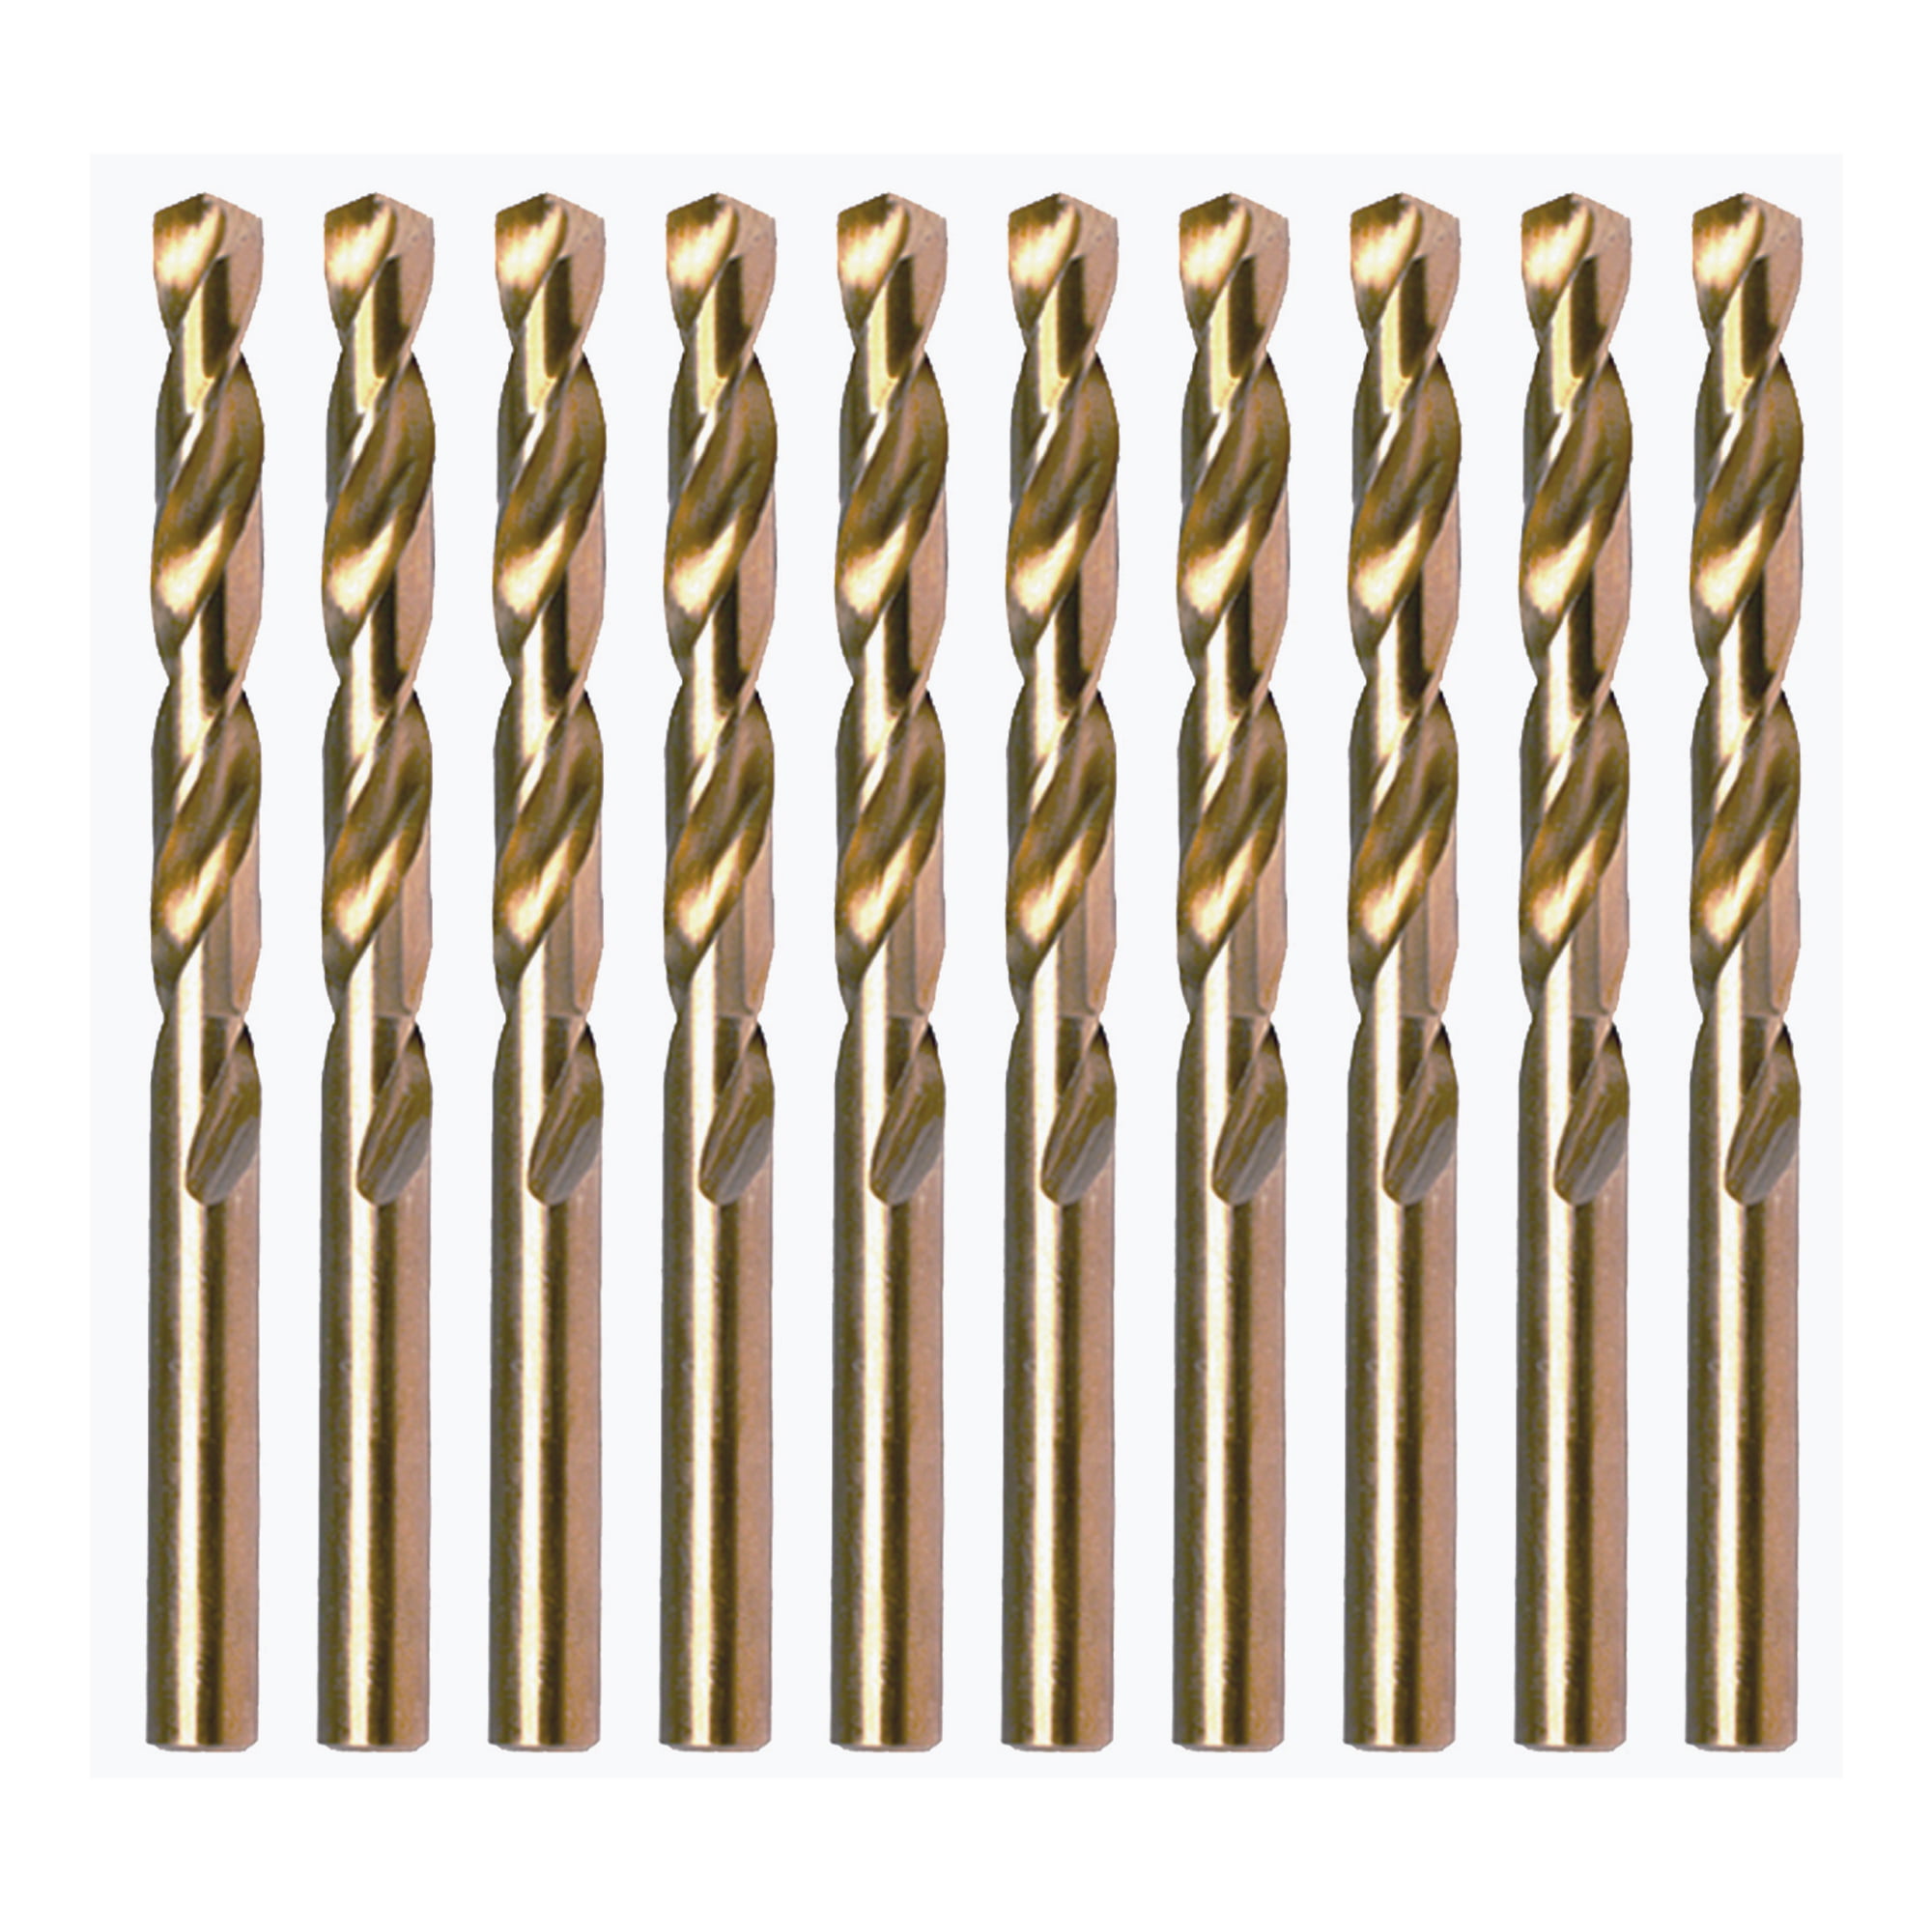 3-Point Auger Drill Bit Twisted Drill Bits Iron for Drill Stainless Steel 5.0 high Speed Steel 10 pcs/Box 4241 Drill Bit Set 